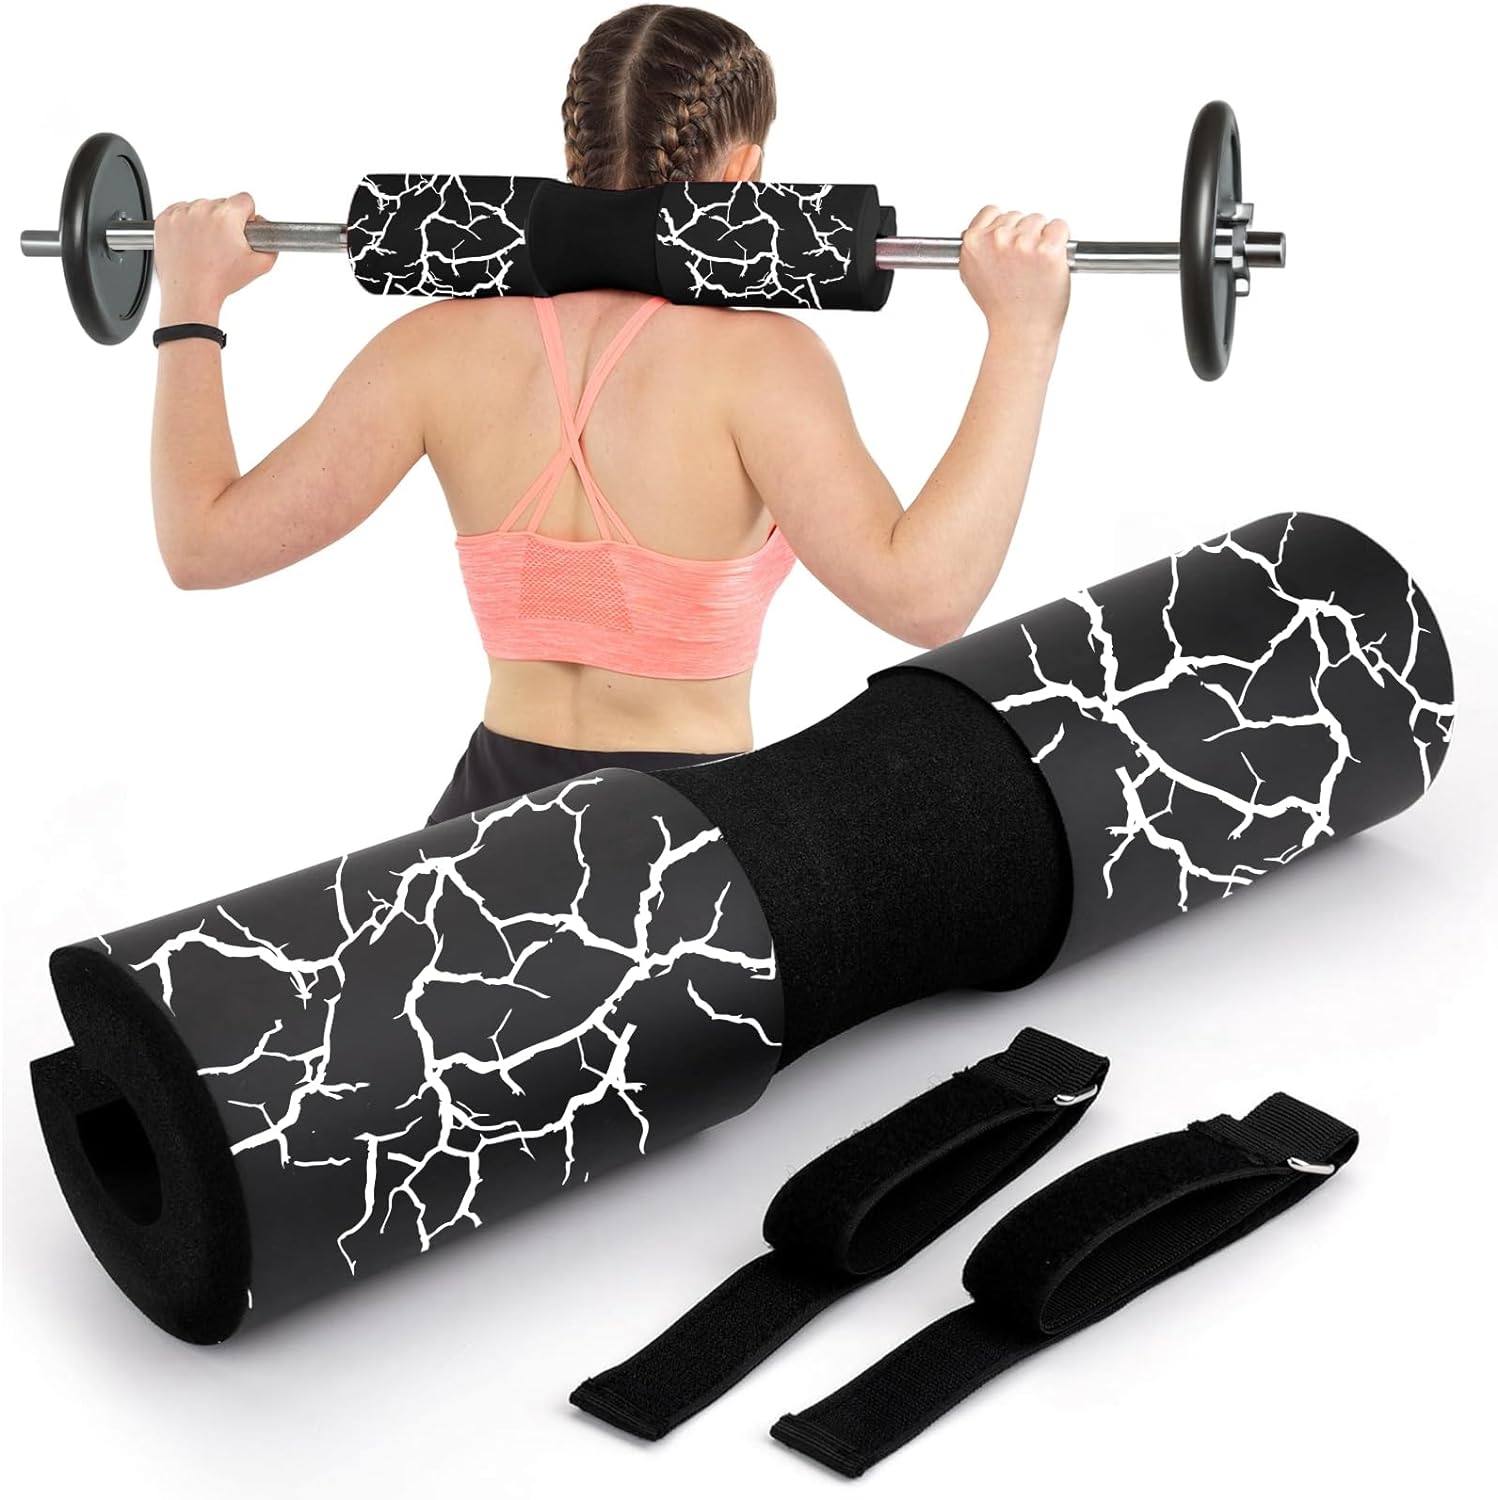 Fitcozi Barbell Pad Foam Squat Bar Pad Hip Thrust Pad with Safety Straps for Squat